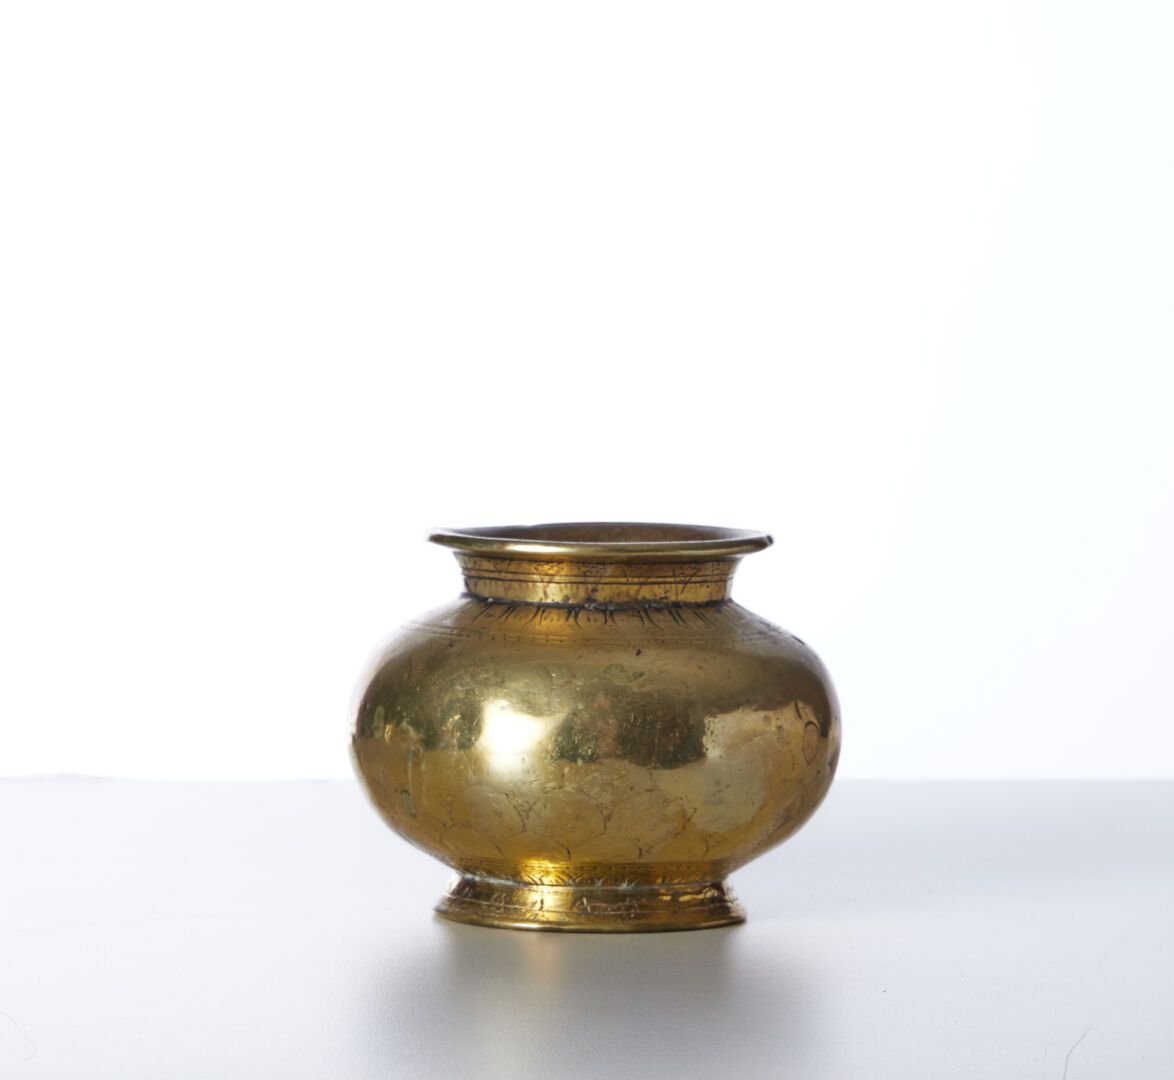 Null A small bronze vase - H : 6,5